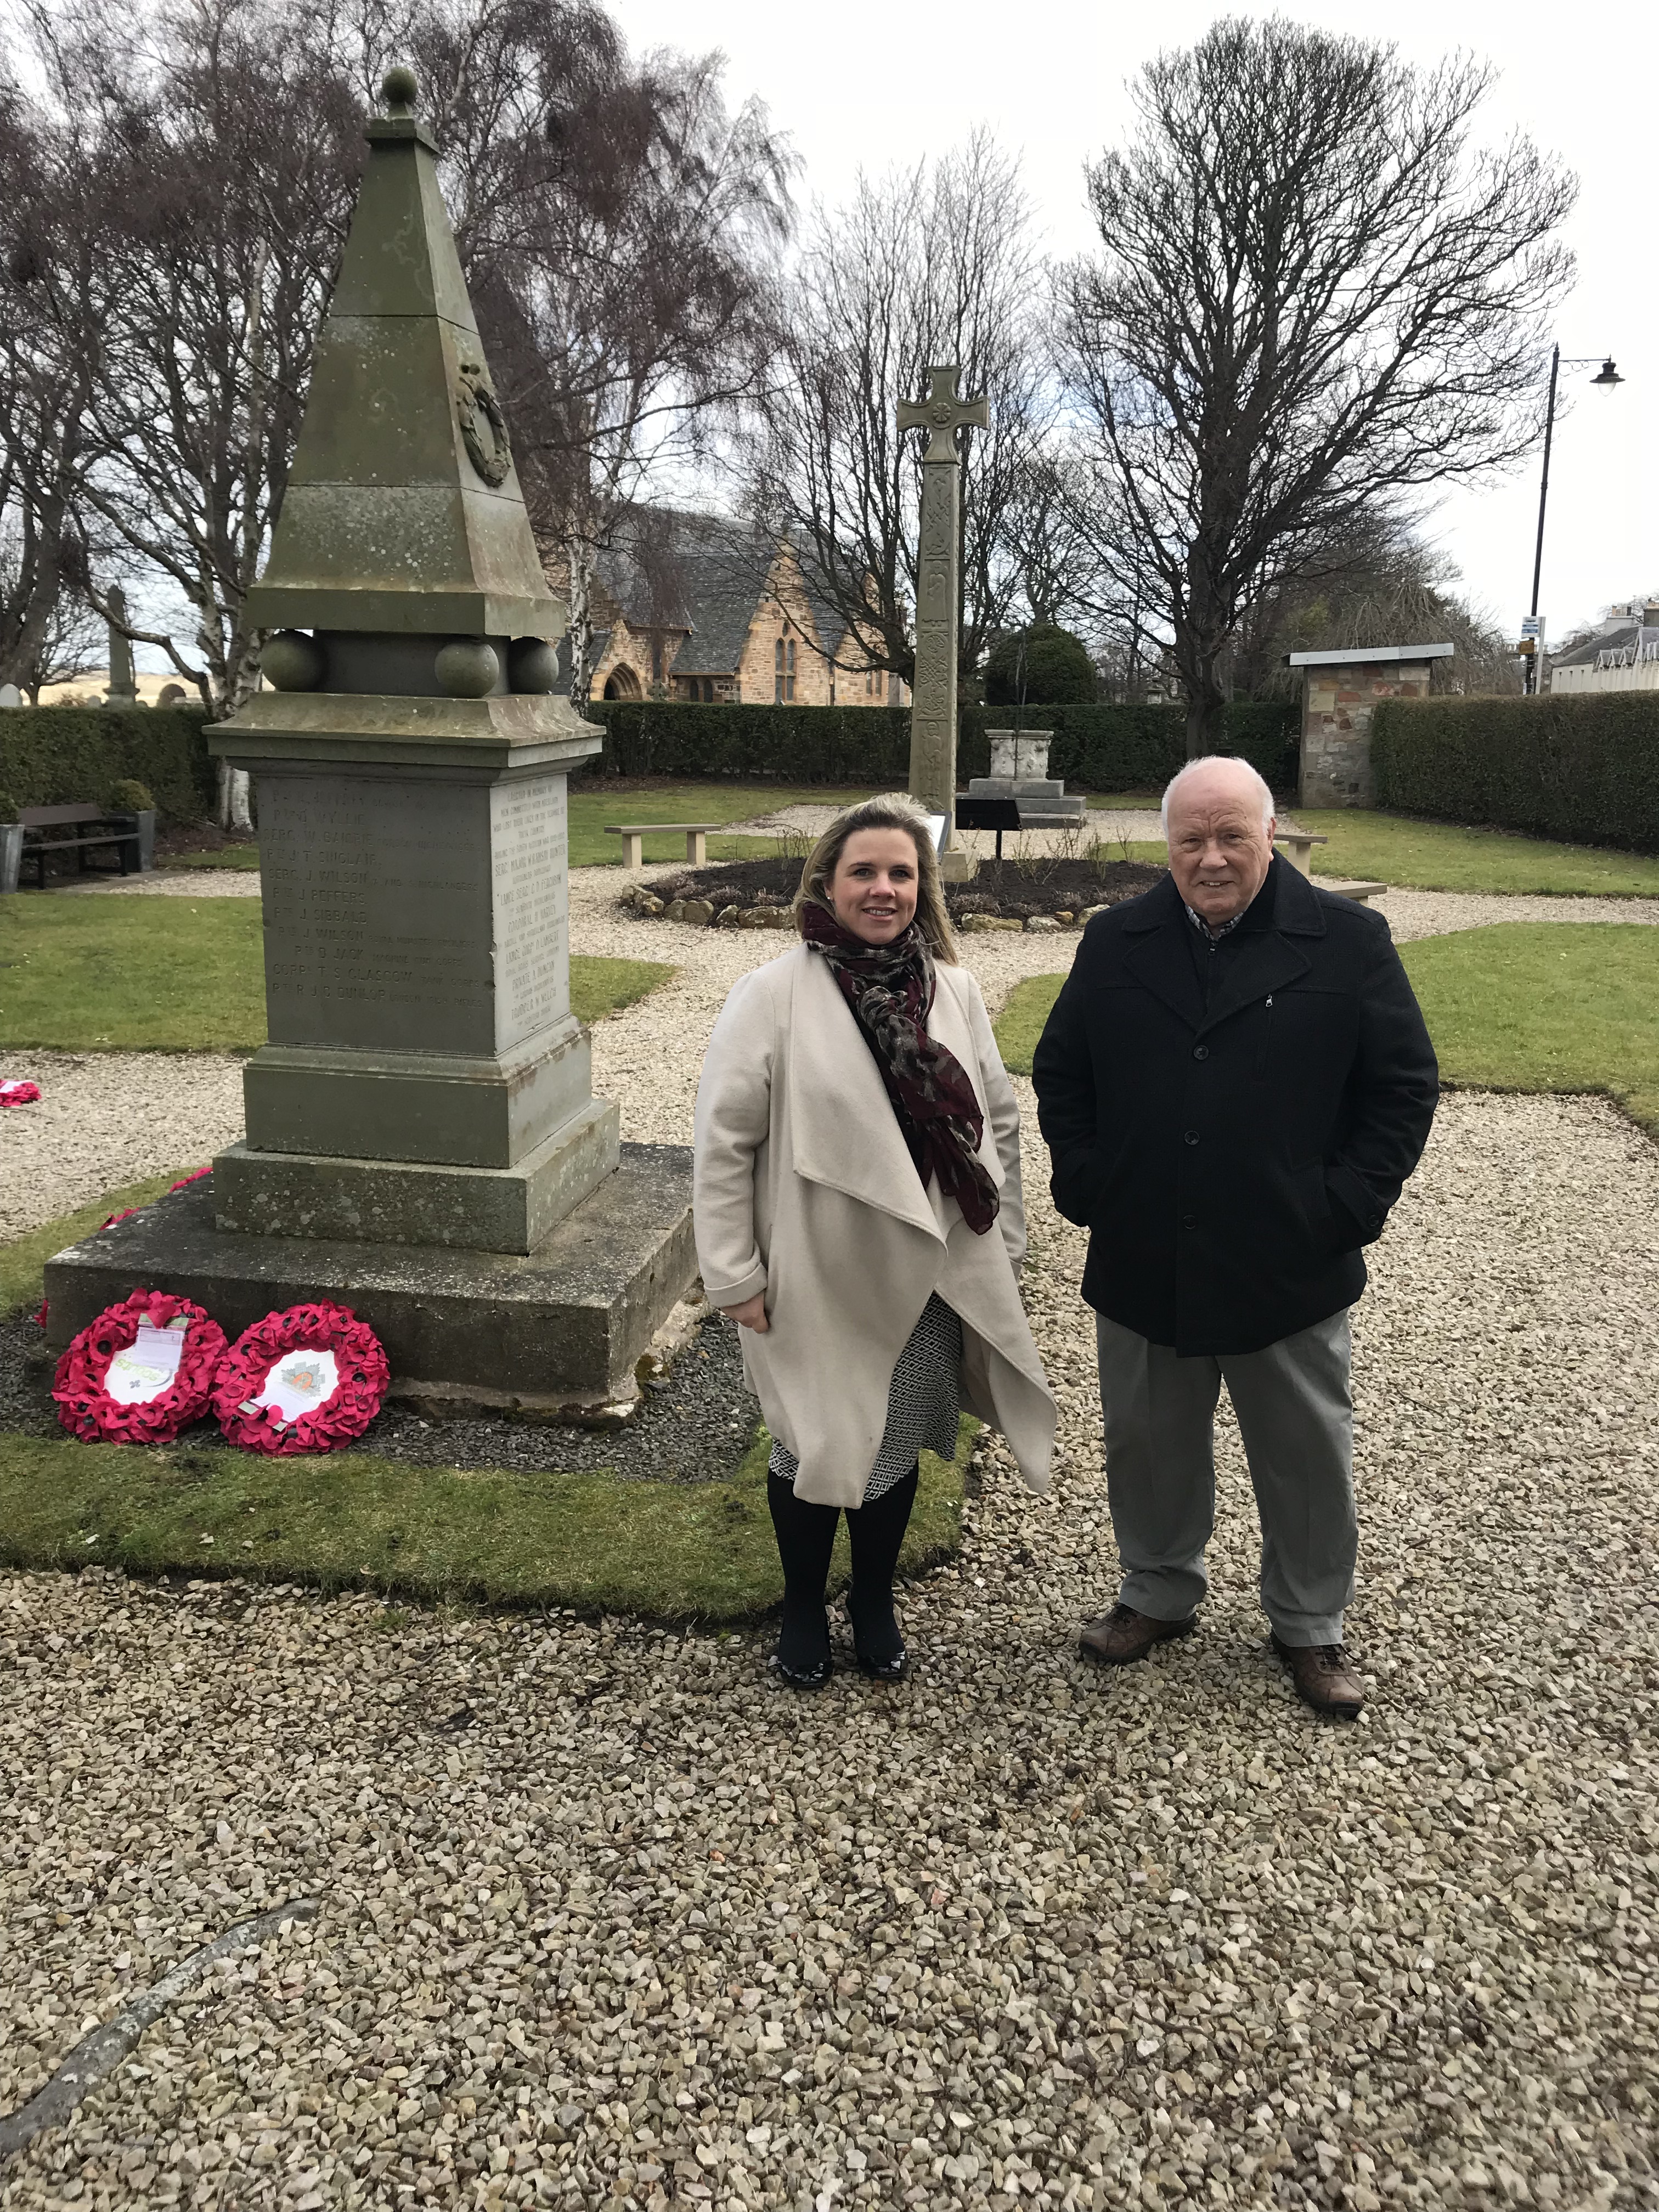 Cruden Homes’ sales and marketing director, Hazel Davies and the  chairman of the Aberlady Community Association, Donald Hay at the Aberlady war memorial 